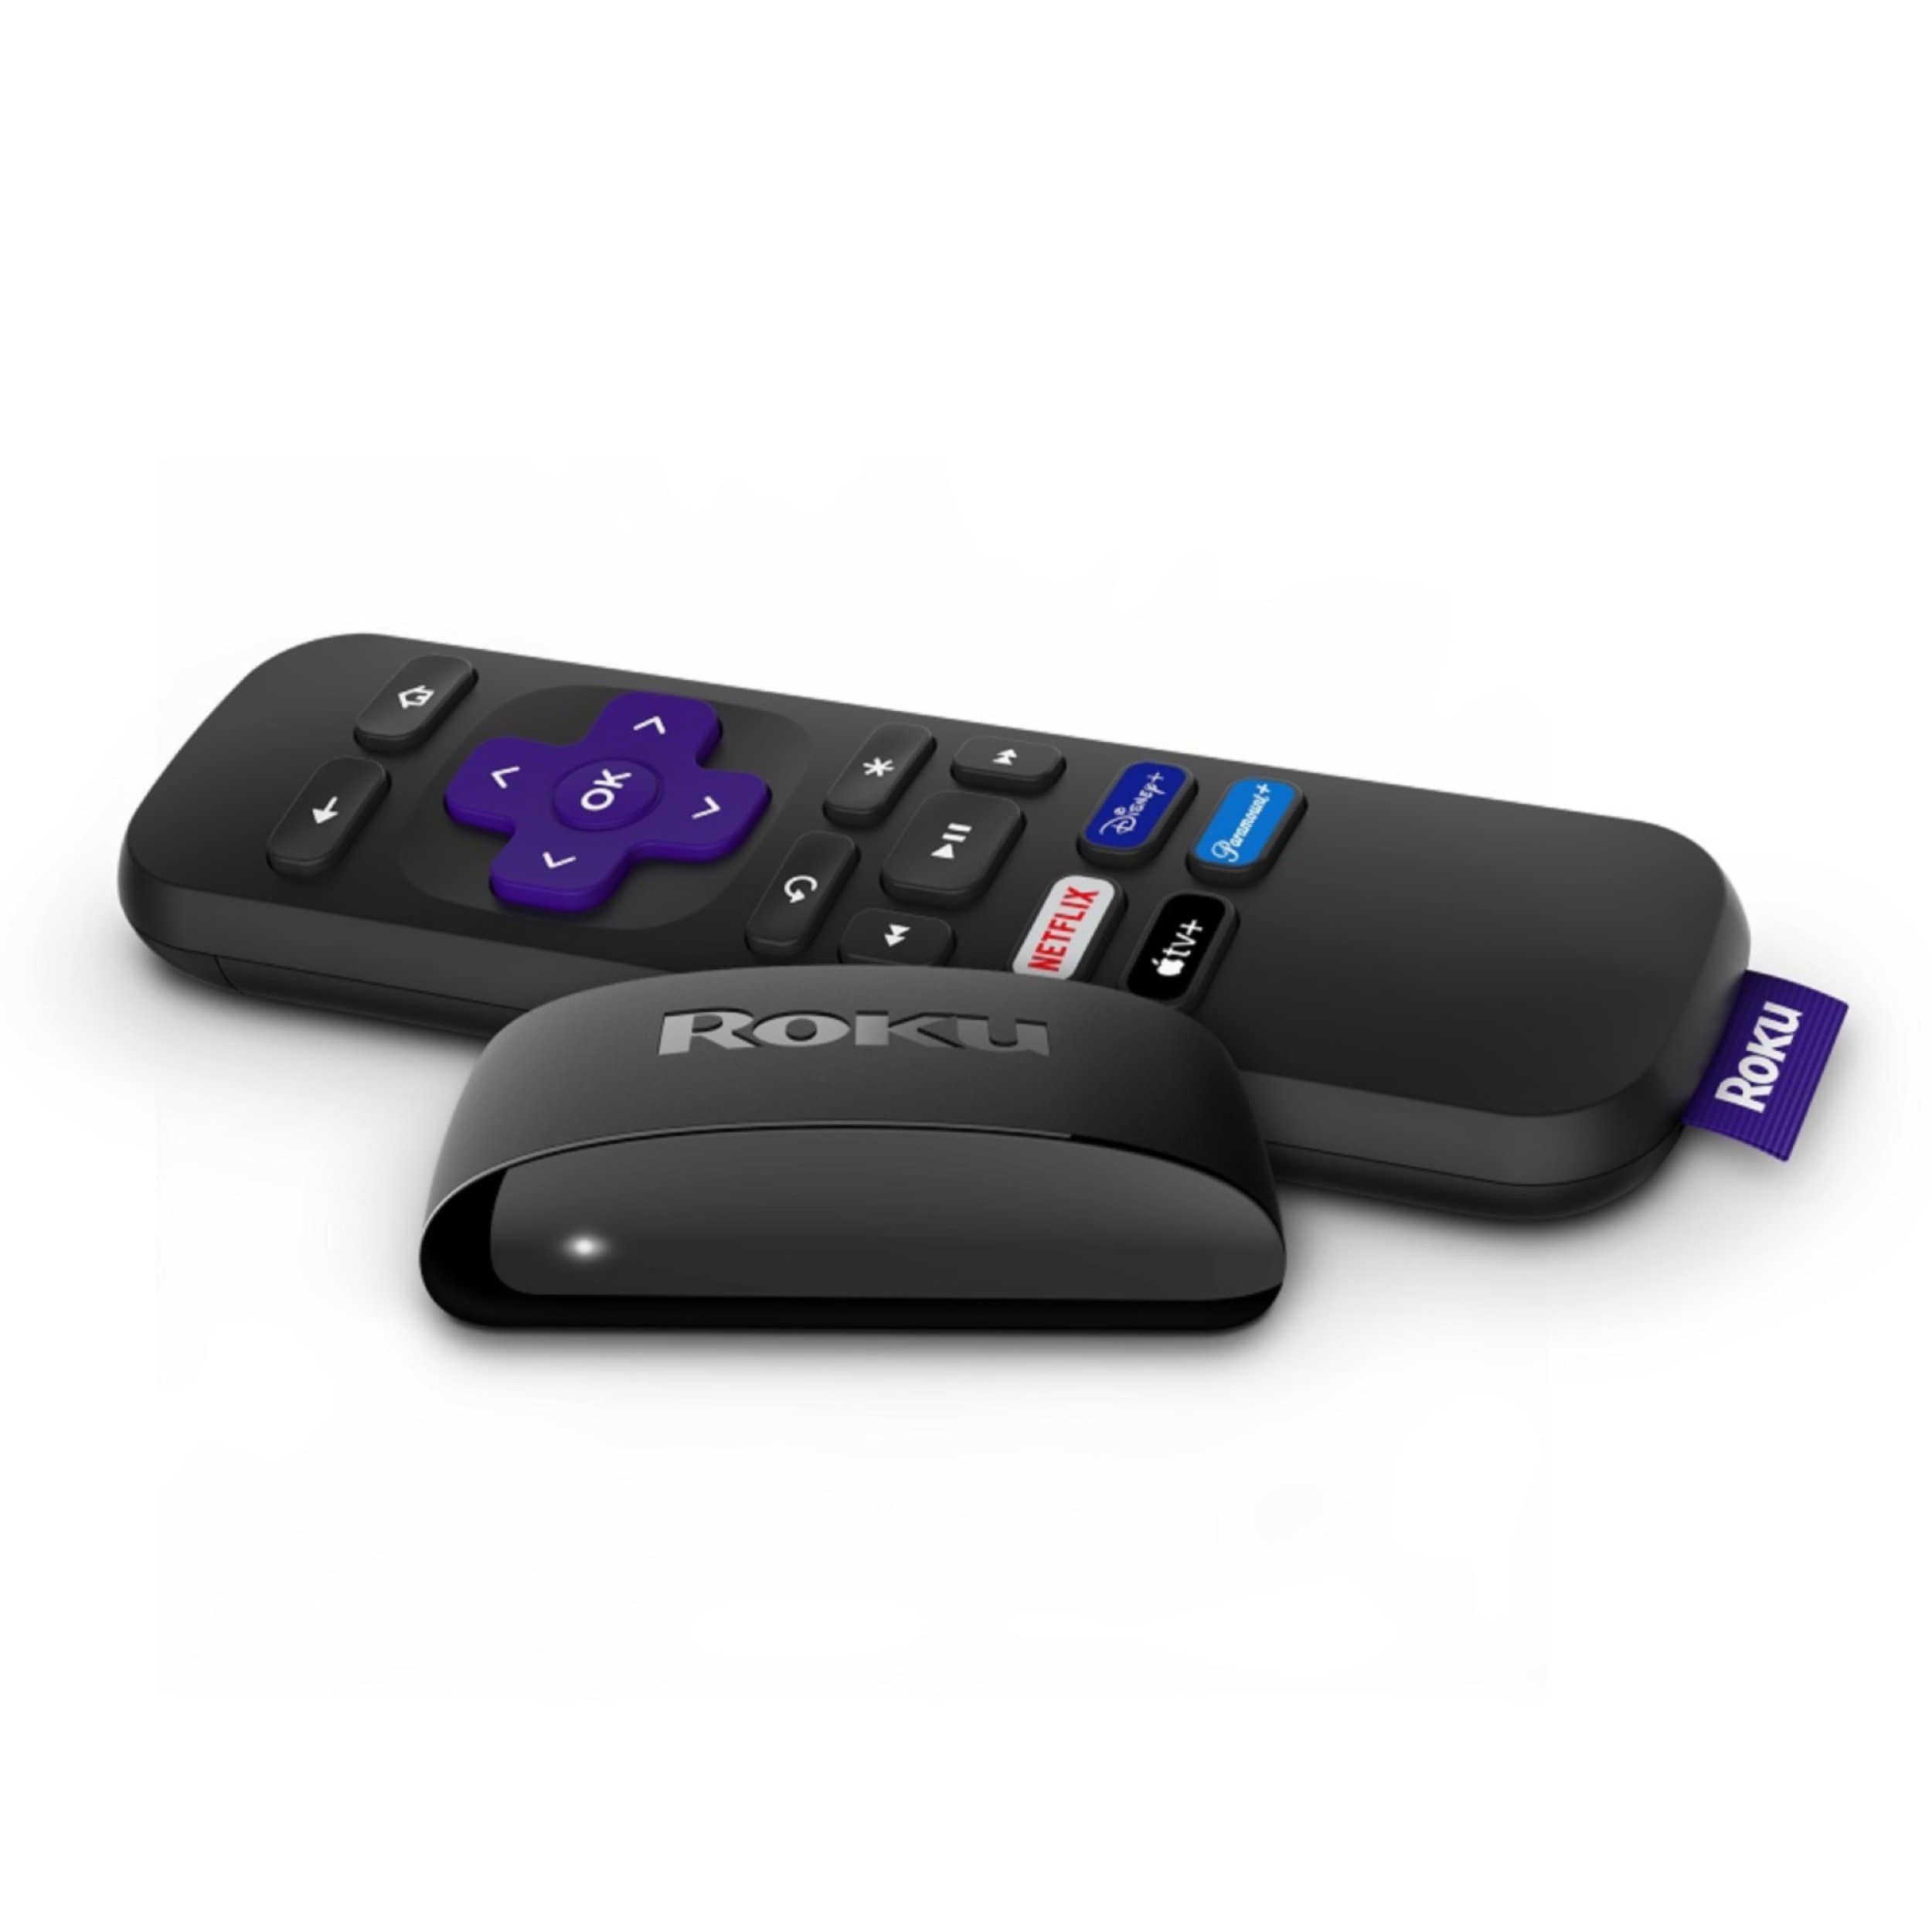 Roku HD Smart Streaming Device with Remote Control Included in the